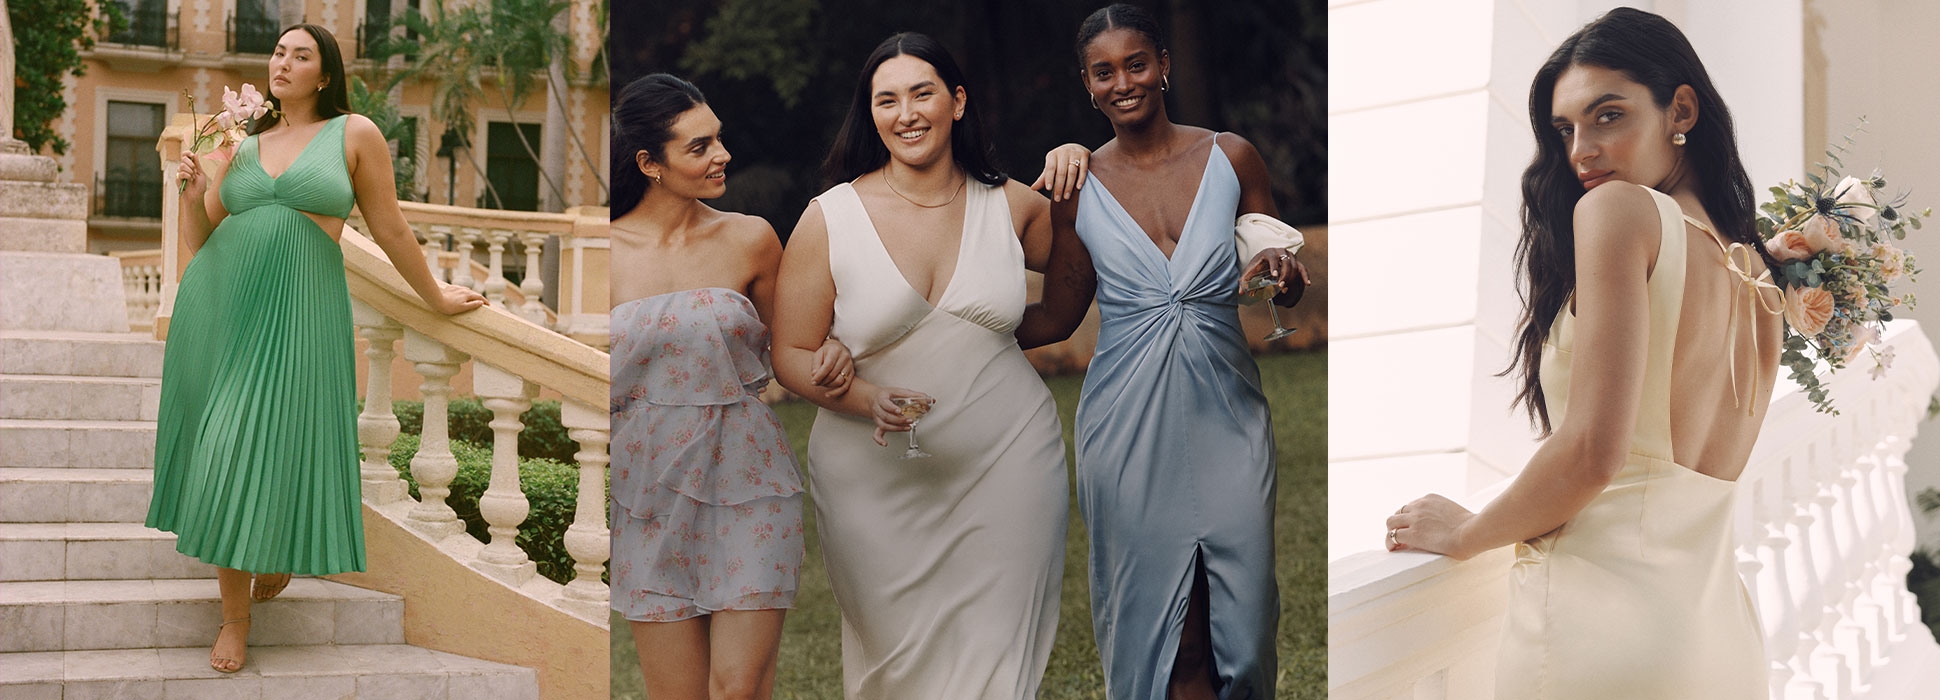 Abercrombie & Fitch Announces 'The A&F Wedding Shop' For Brides,  Bachelorettes And Best-Dressed Guests